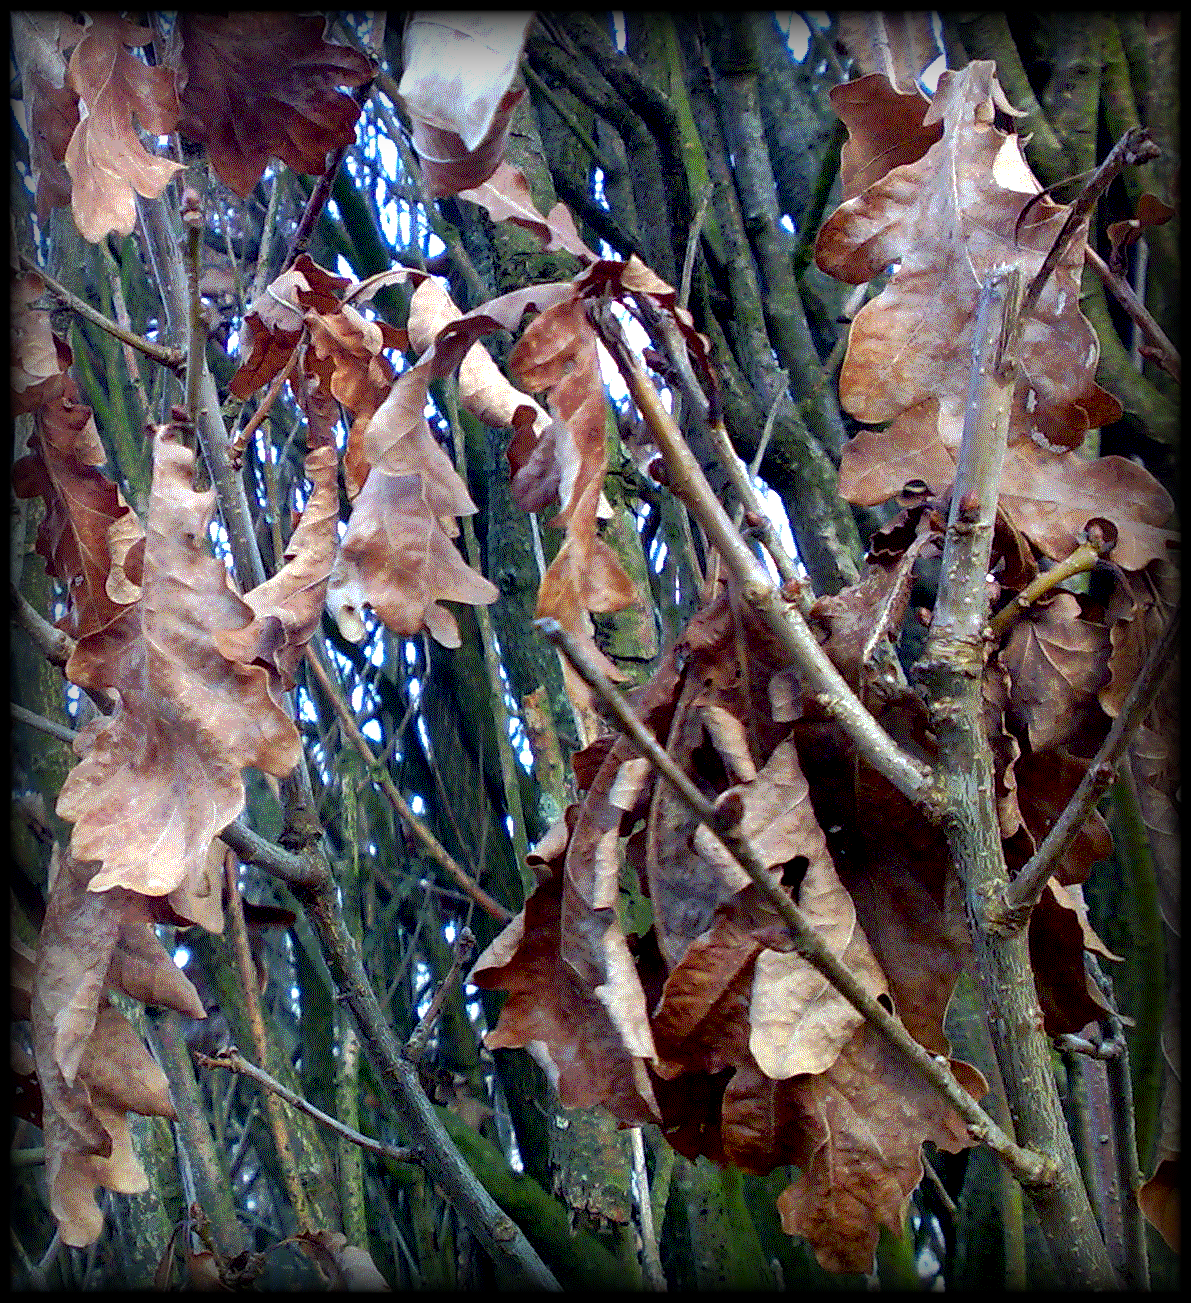 Photograph: Dry brown leaves stuck in branches